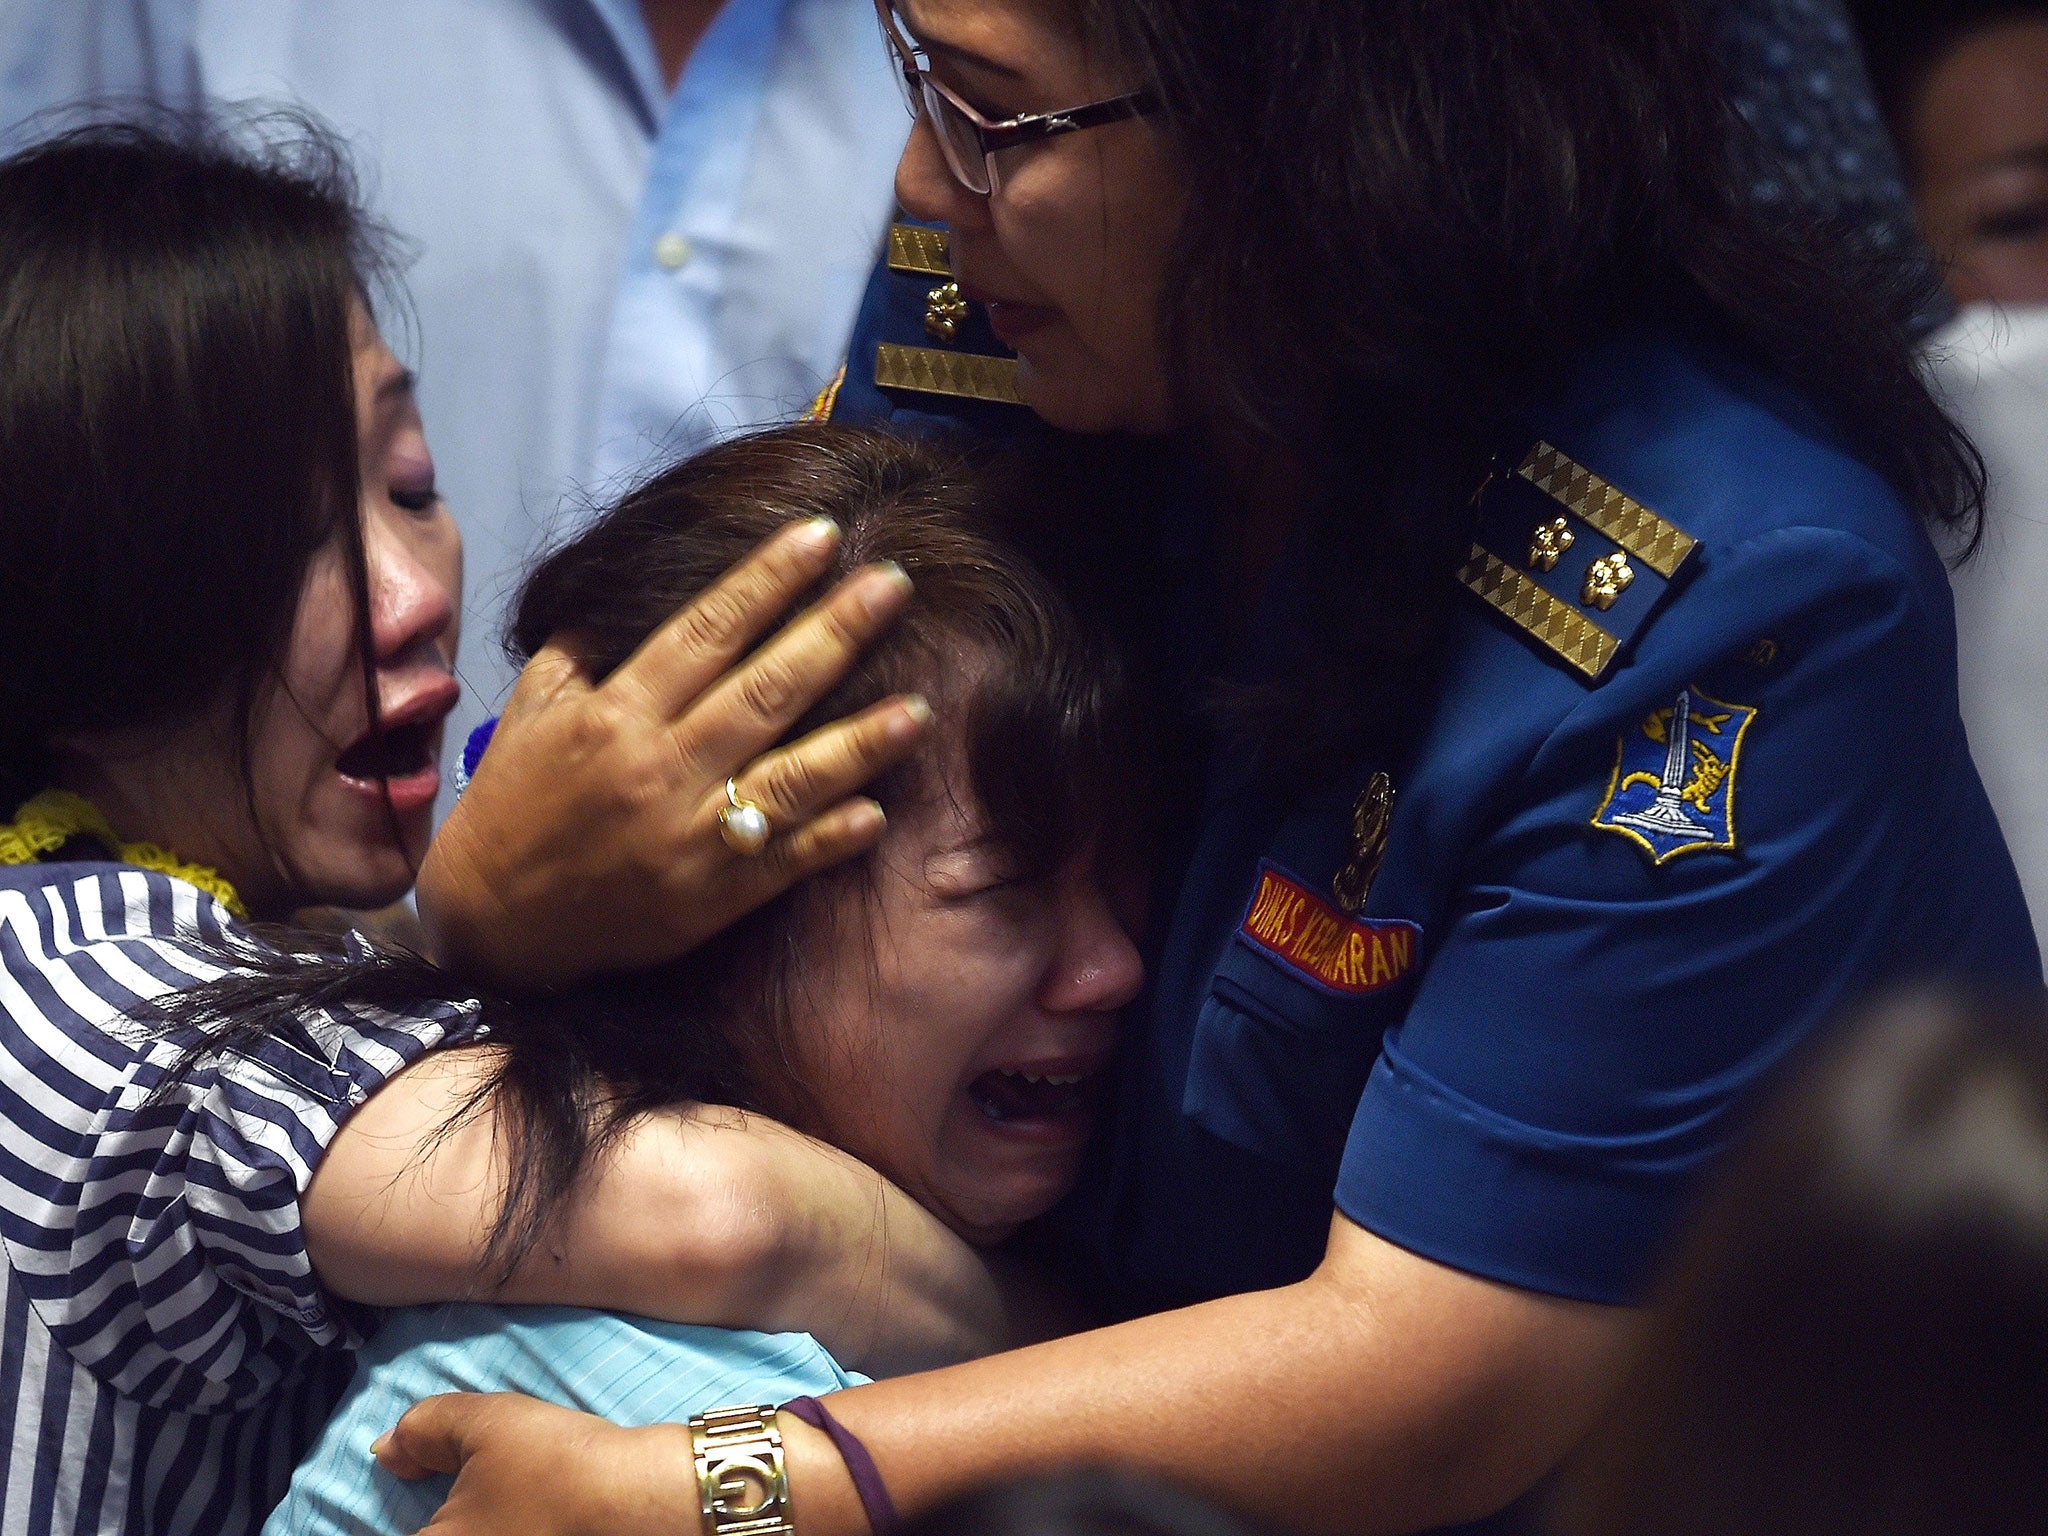 Family members of passengers onboard the missing Malaysian air carrier AirAsia flight QZ8501 react after watching news reports showing an unidentified body floating in the Java sea, inside the crisis-centre set up at Juanda International Airport in Suraba